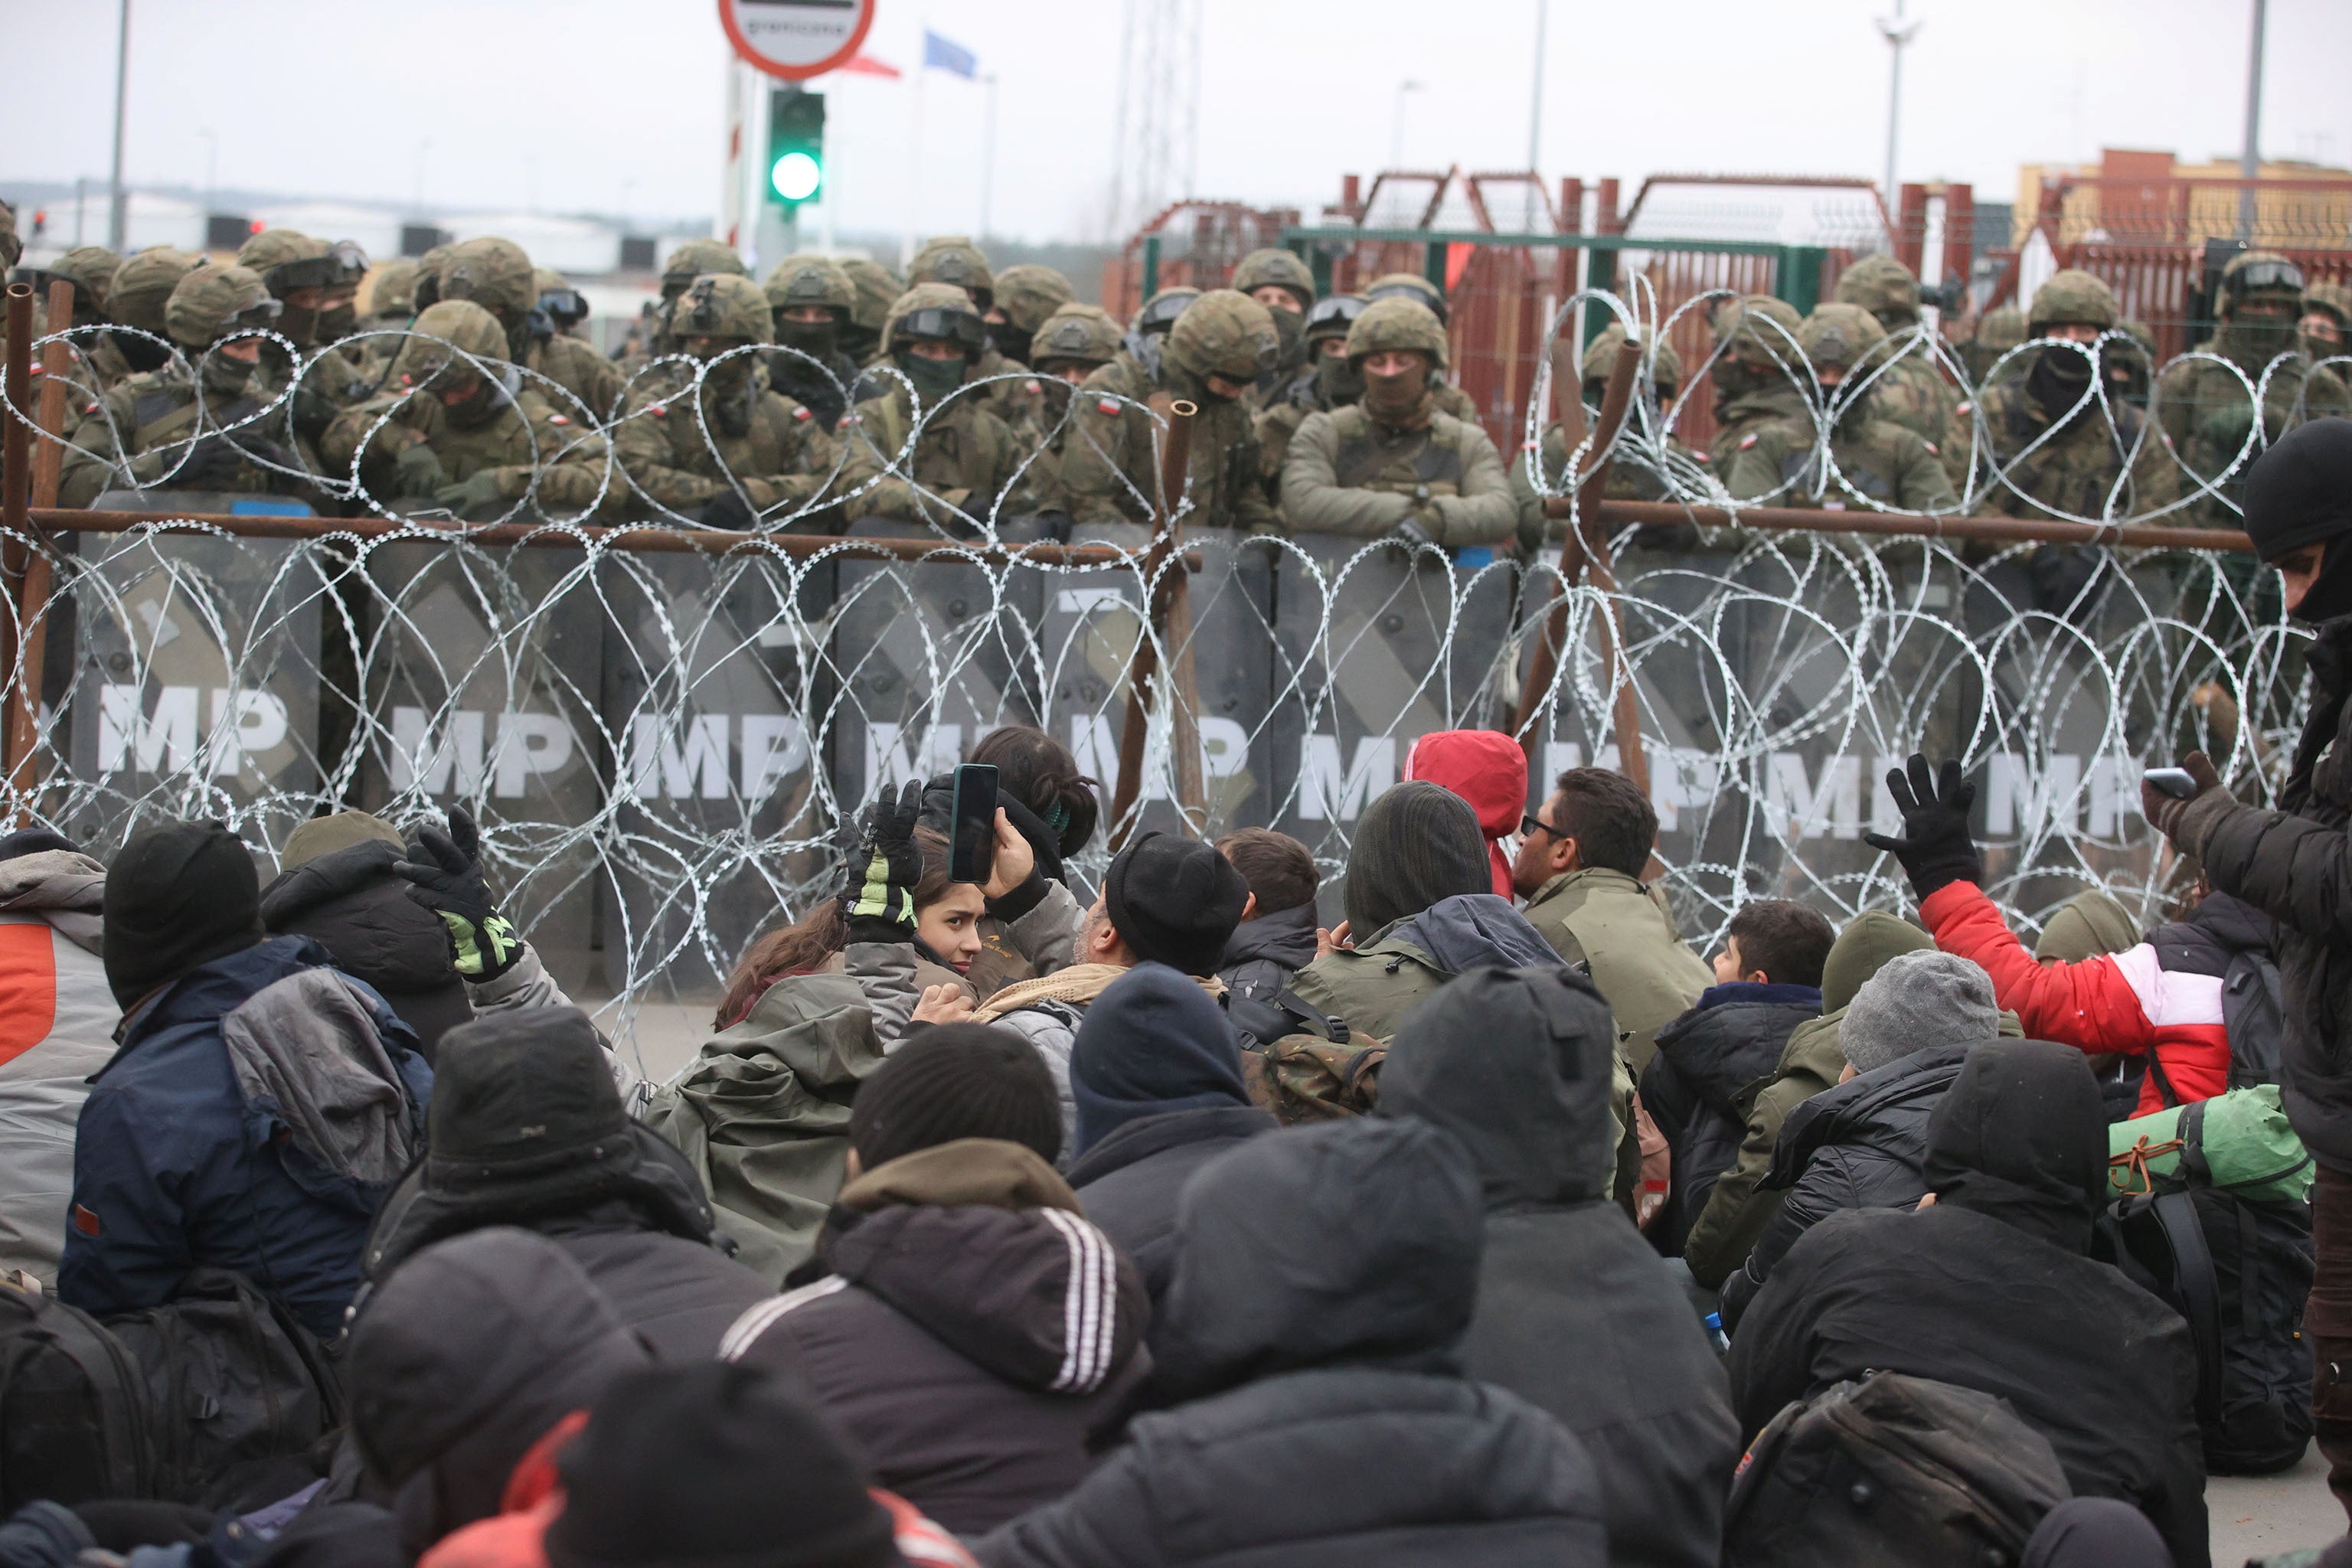 The crisis on the Poland-Belarus border has broader implications for the EU